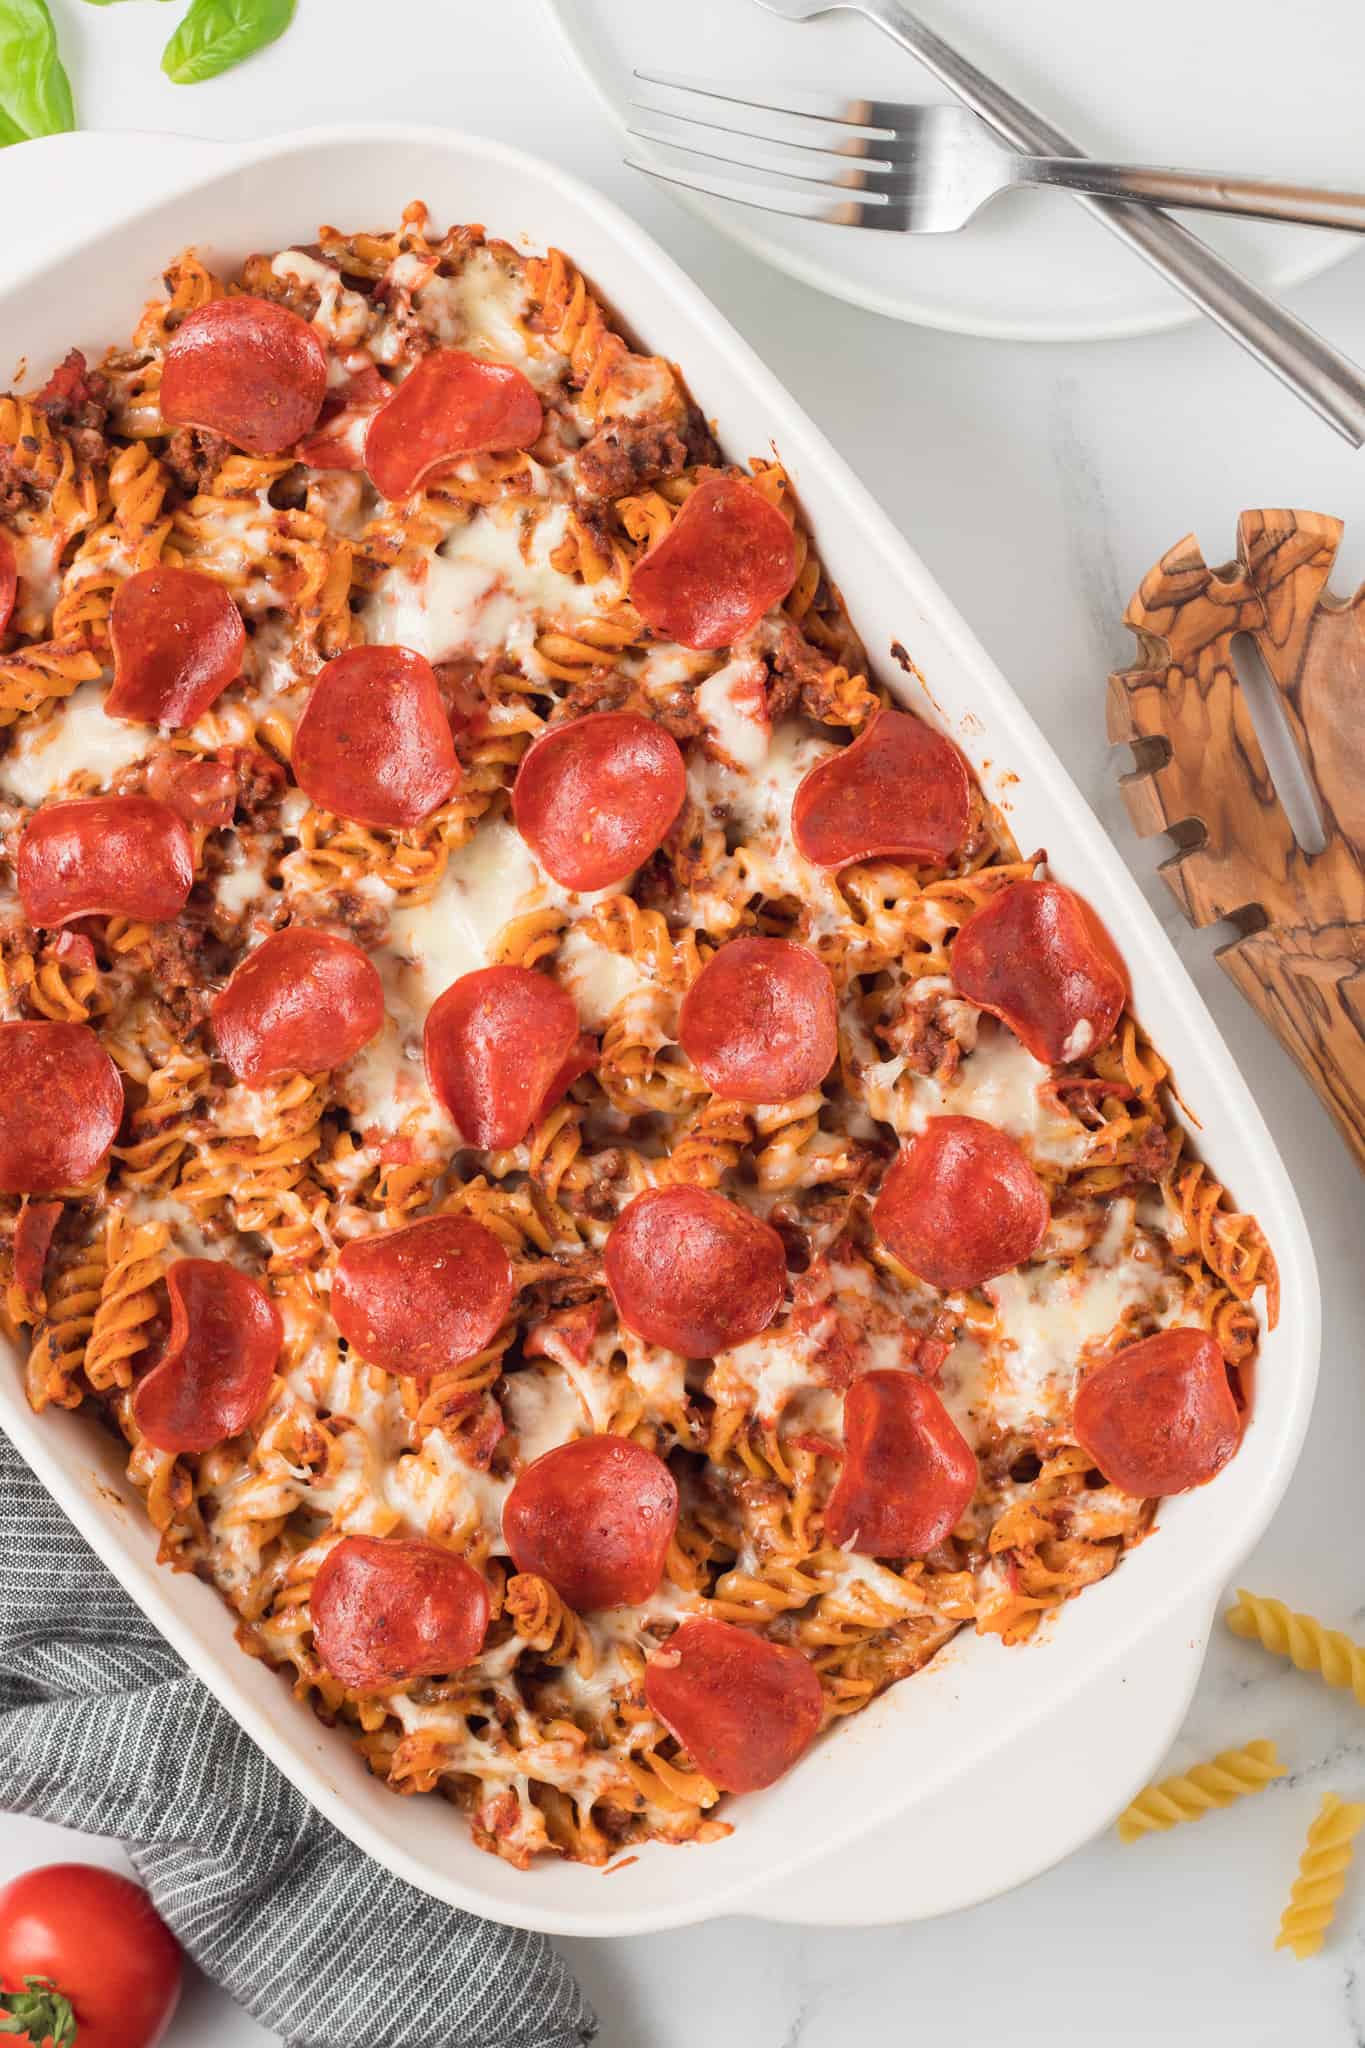 Pizza Casserole is a delicious baked rotini pasta loaded with ground beef, pizza sauce, pepperoni and mozzarella cheese.